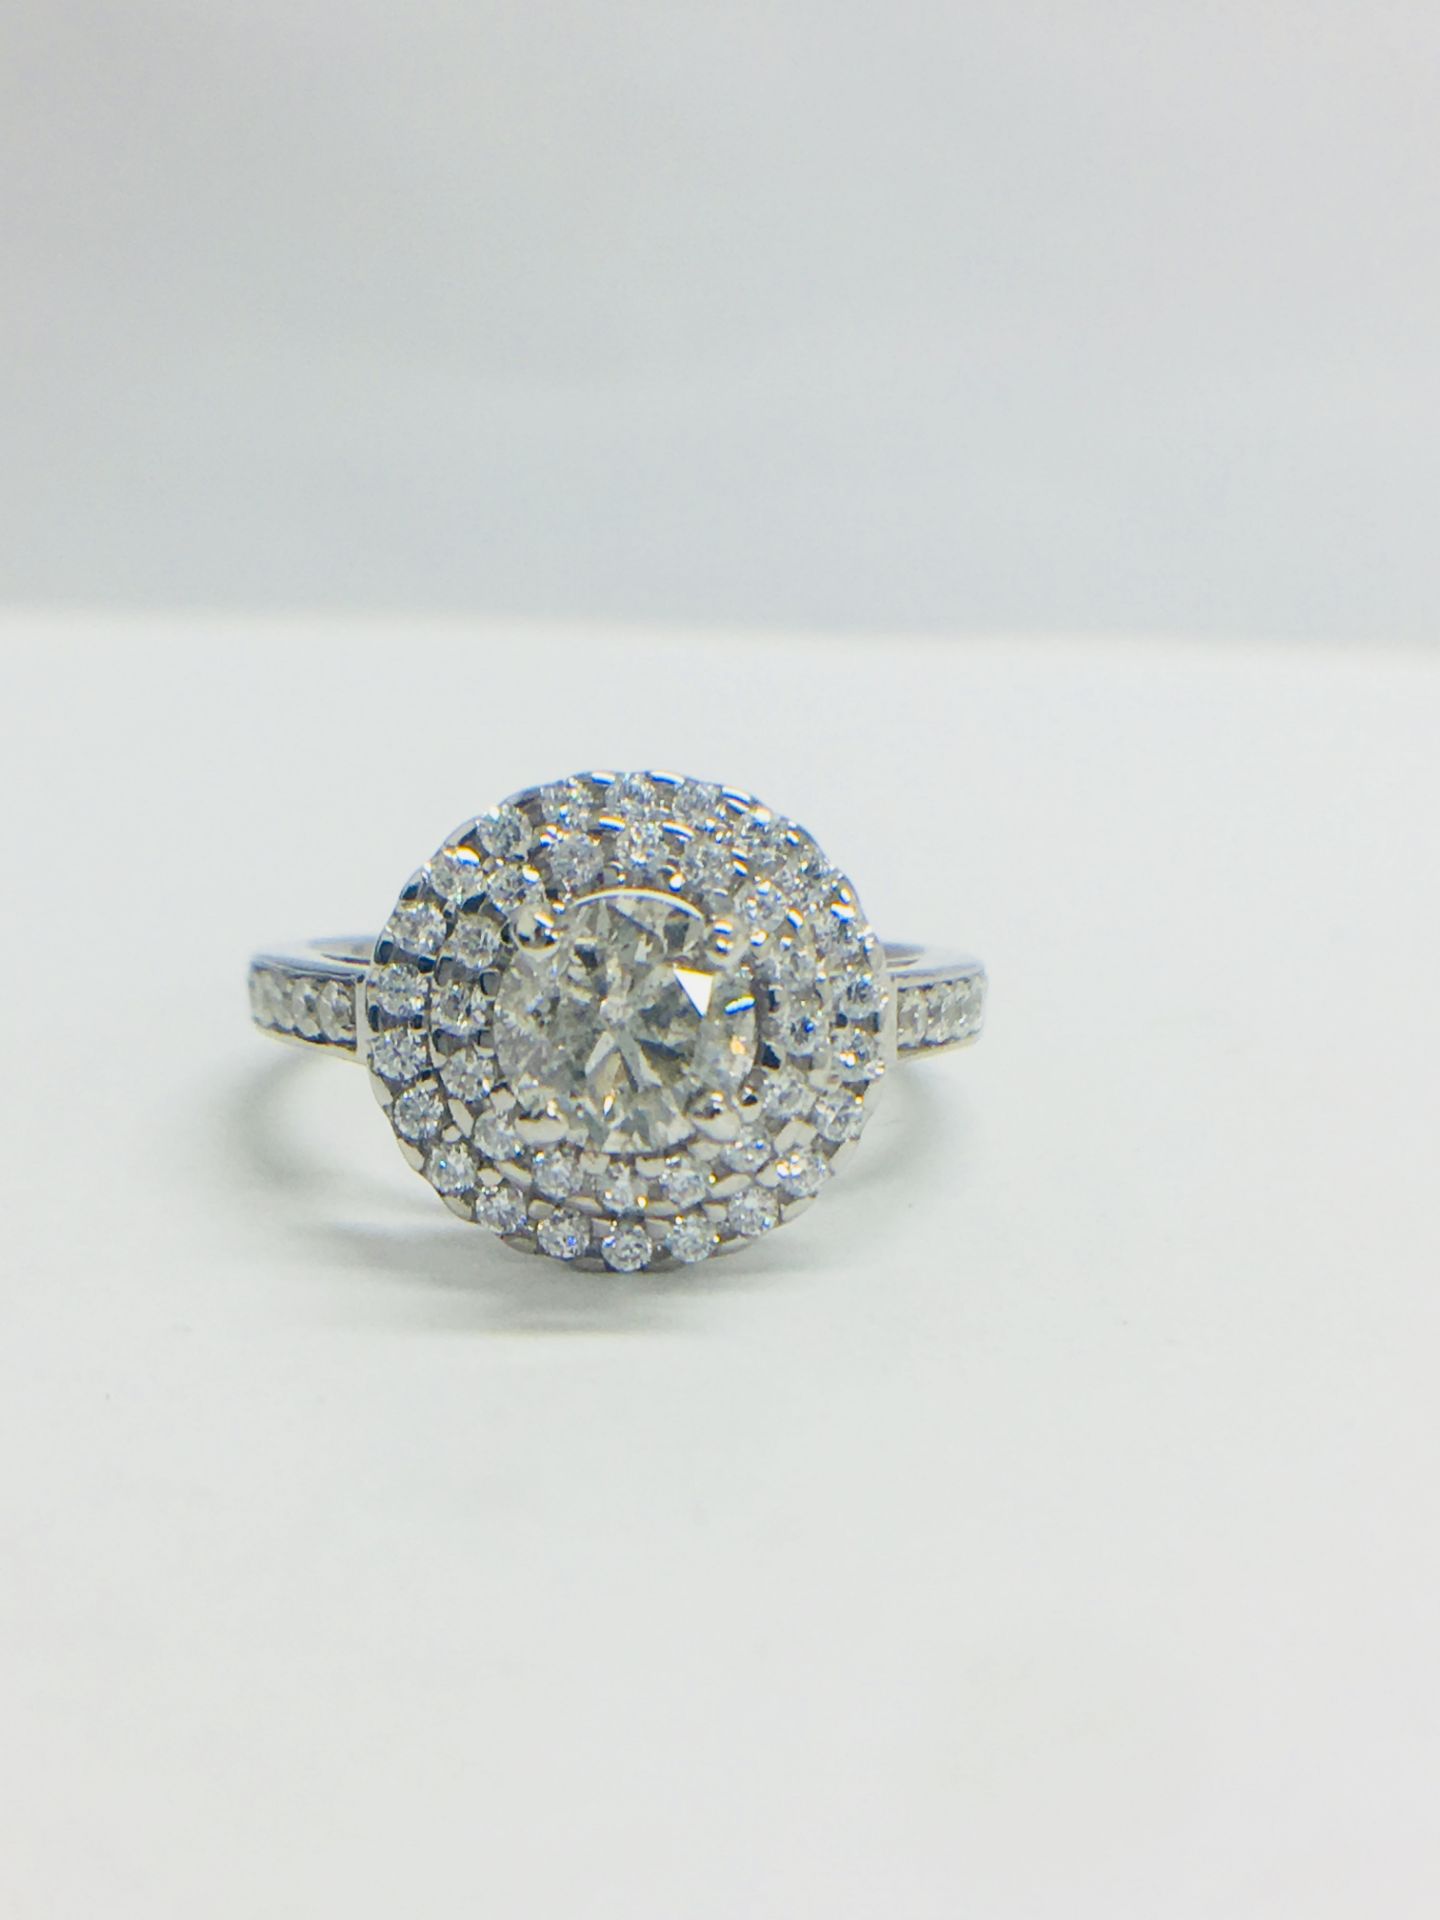 Platinum Double Halo Style Ring1.40Ct Total Diamond Weight,